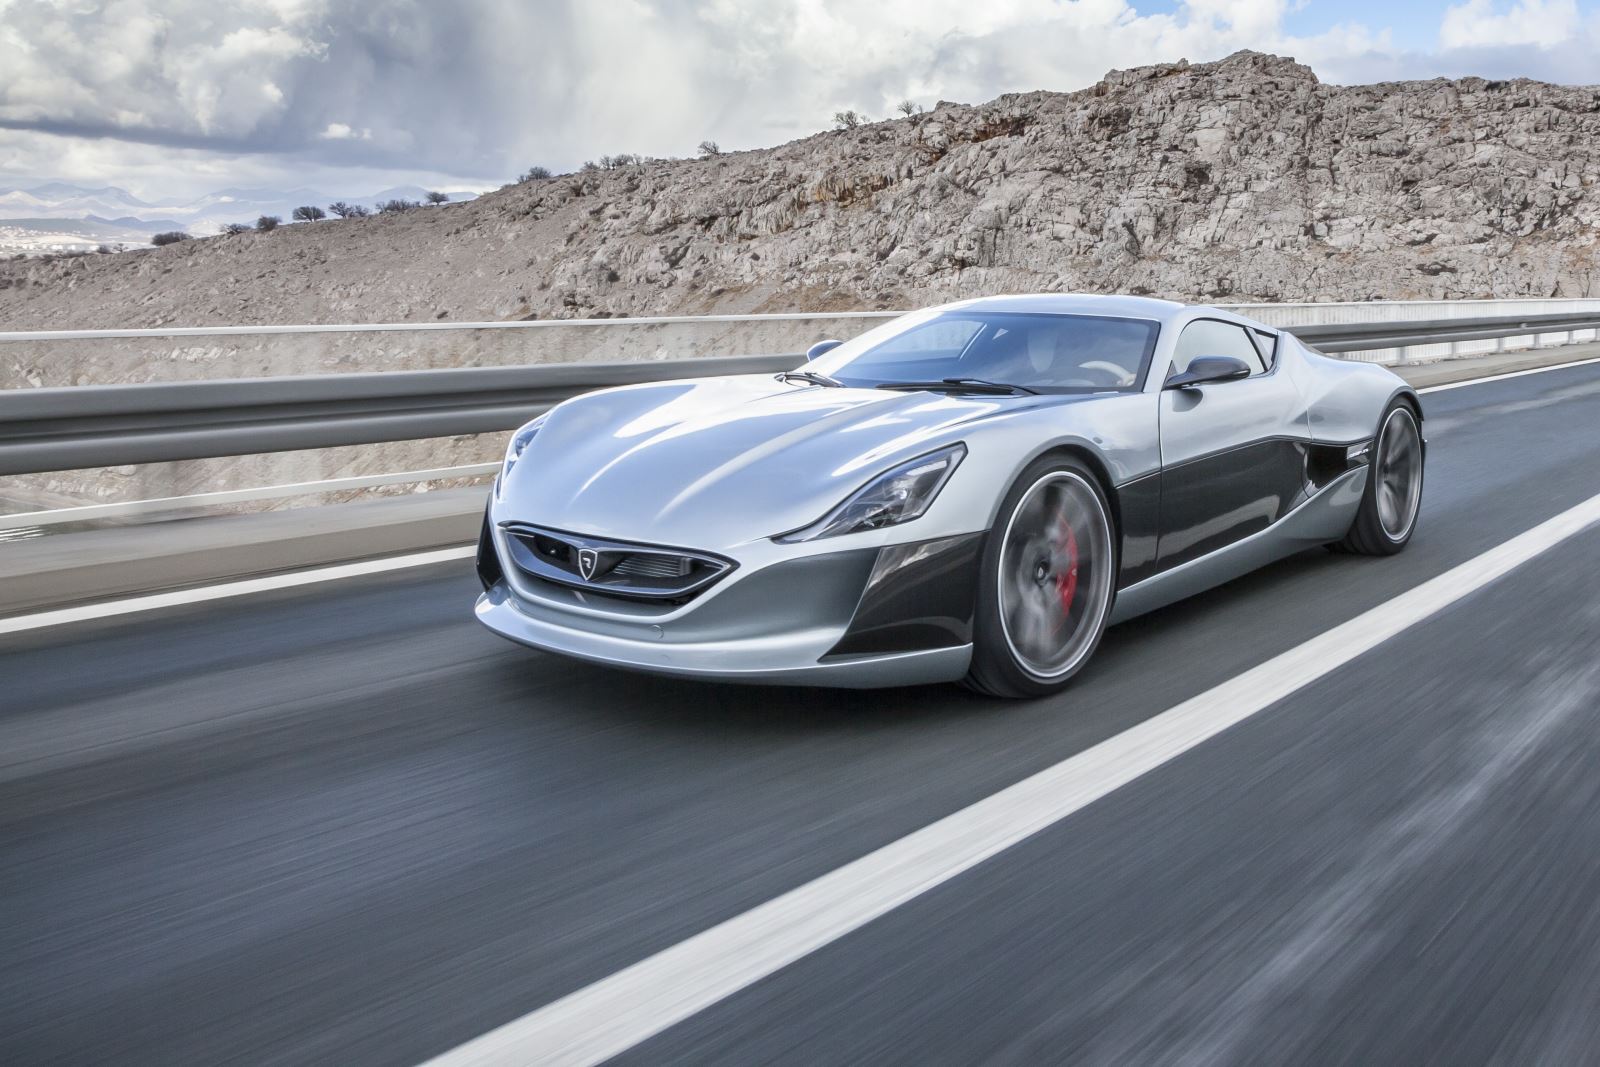 The Concept_One from Rimac (photo: Rimac Automobili)